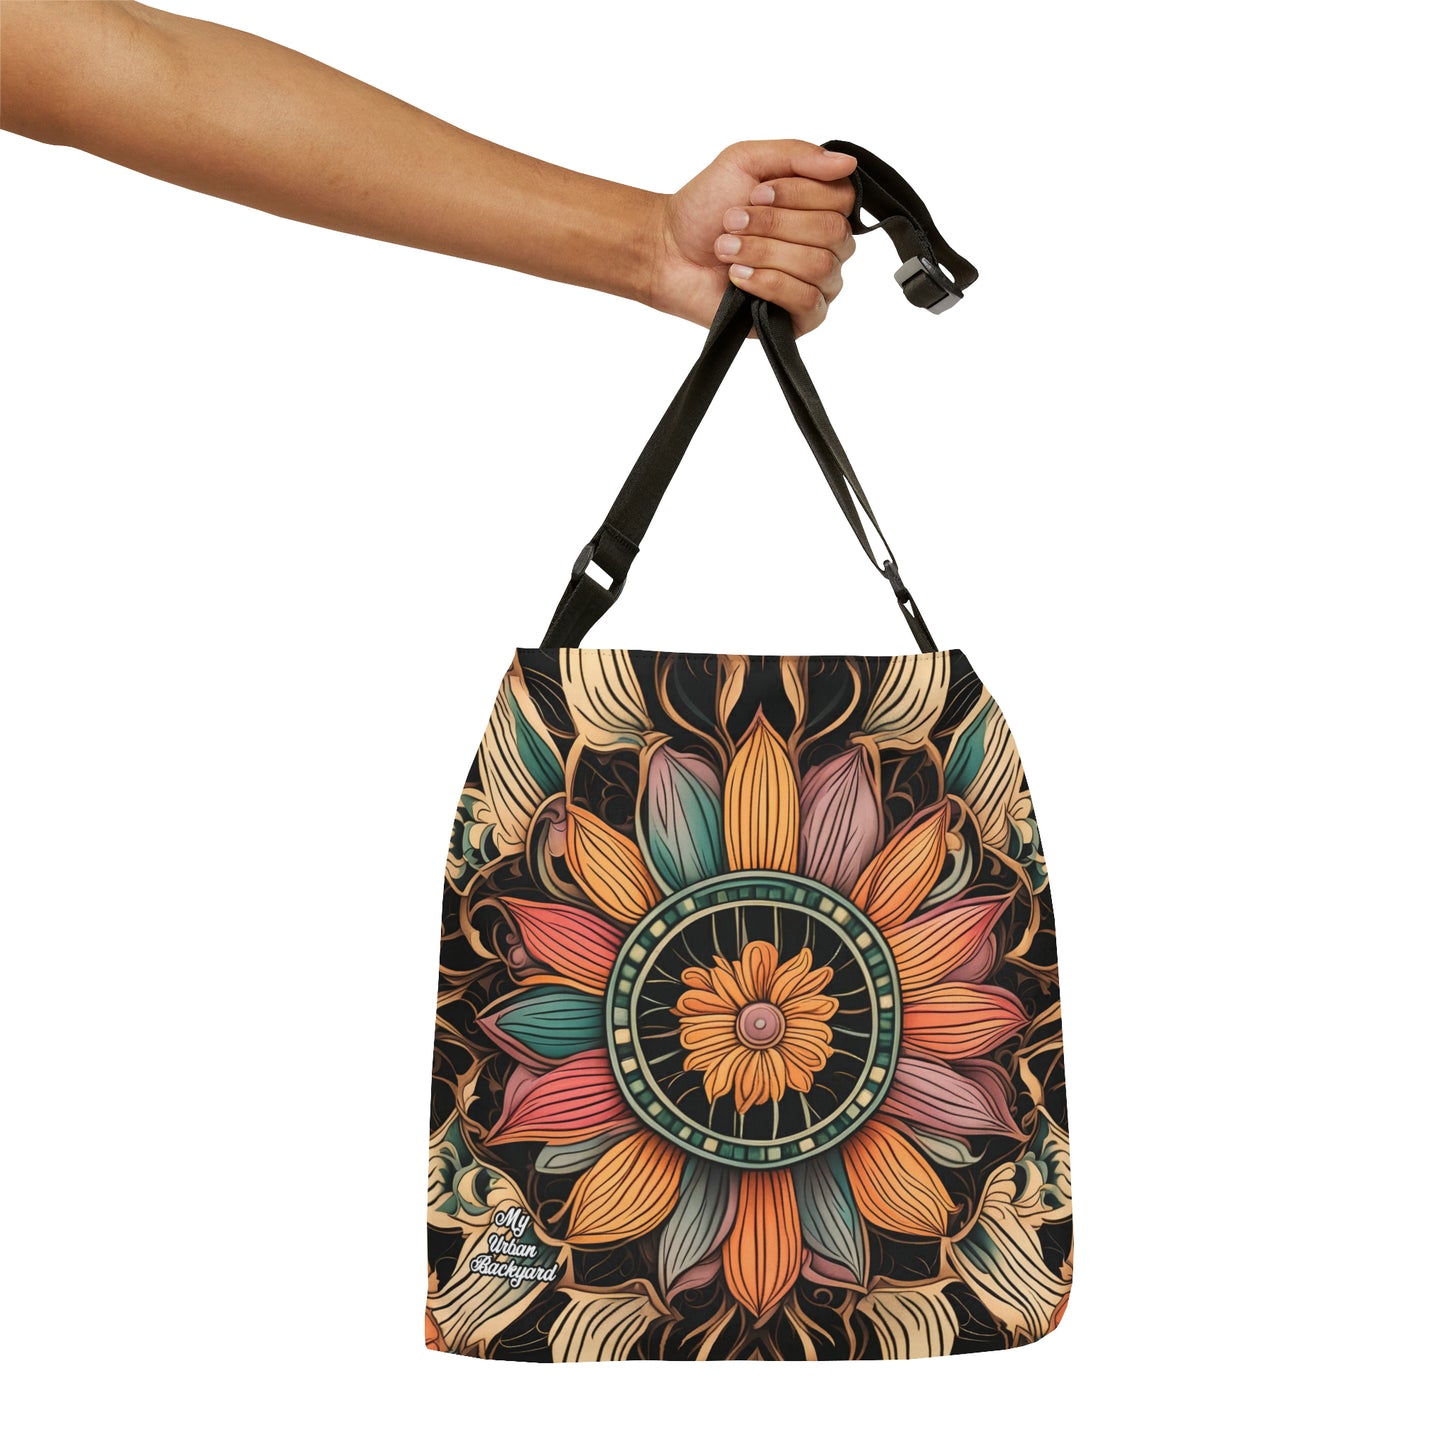 Art Deco Flowers, Tote Bag with Adjustable Strap - Trendy and Versatile